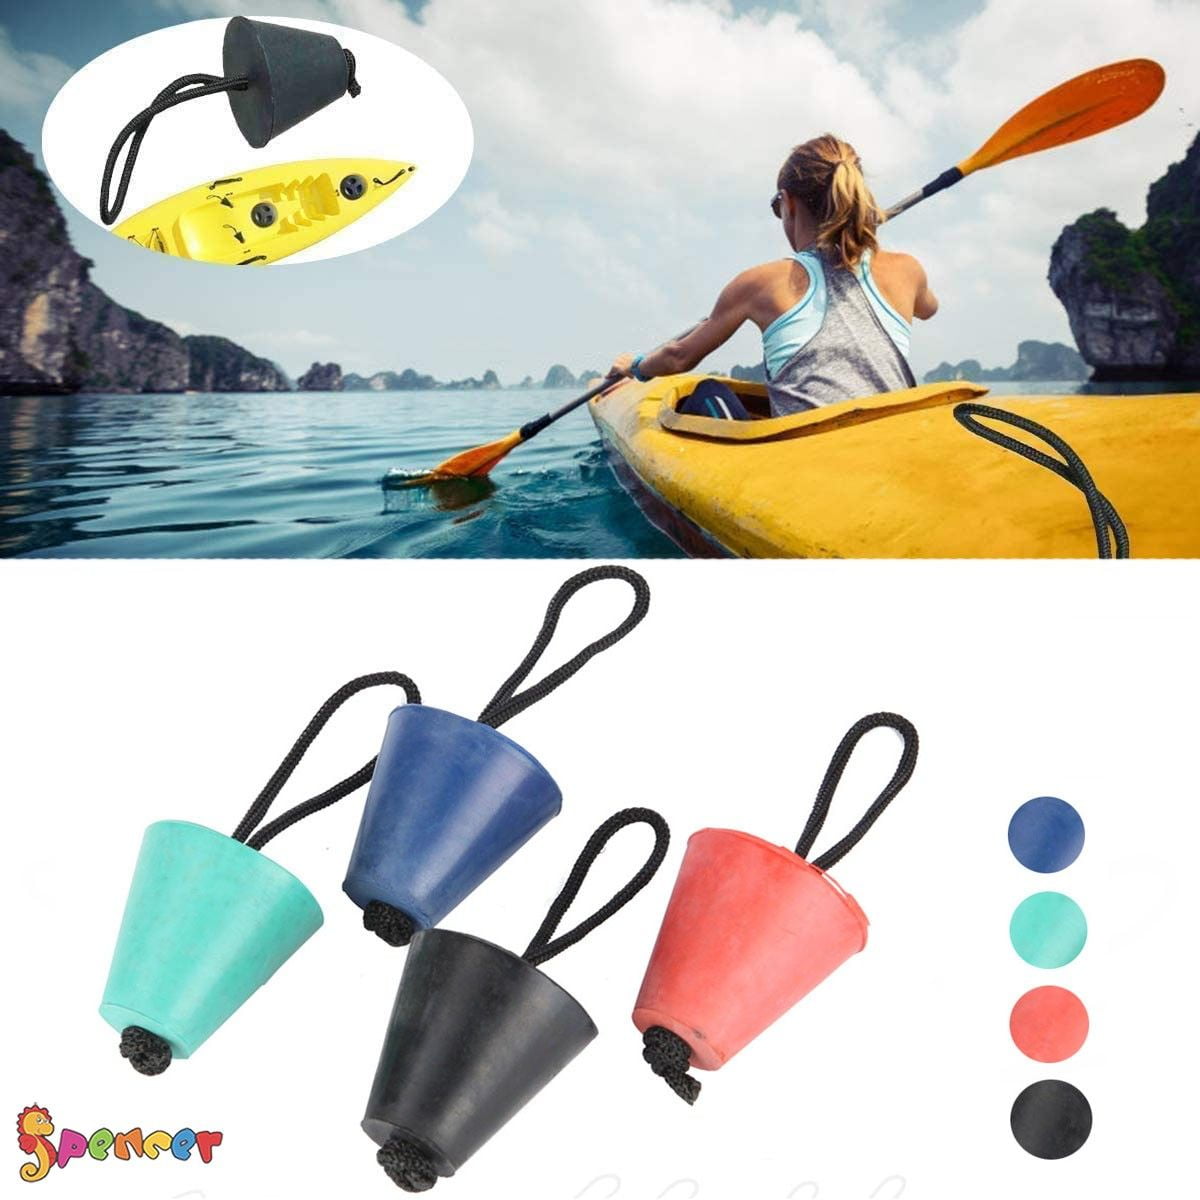 Homyl Set 8 Assorted Colors Durable Rubber Kayak Scupper Plugs Drain Holes Bungs for Canoe Marine Boat Fishing Dinghy